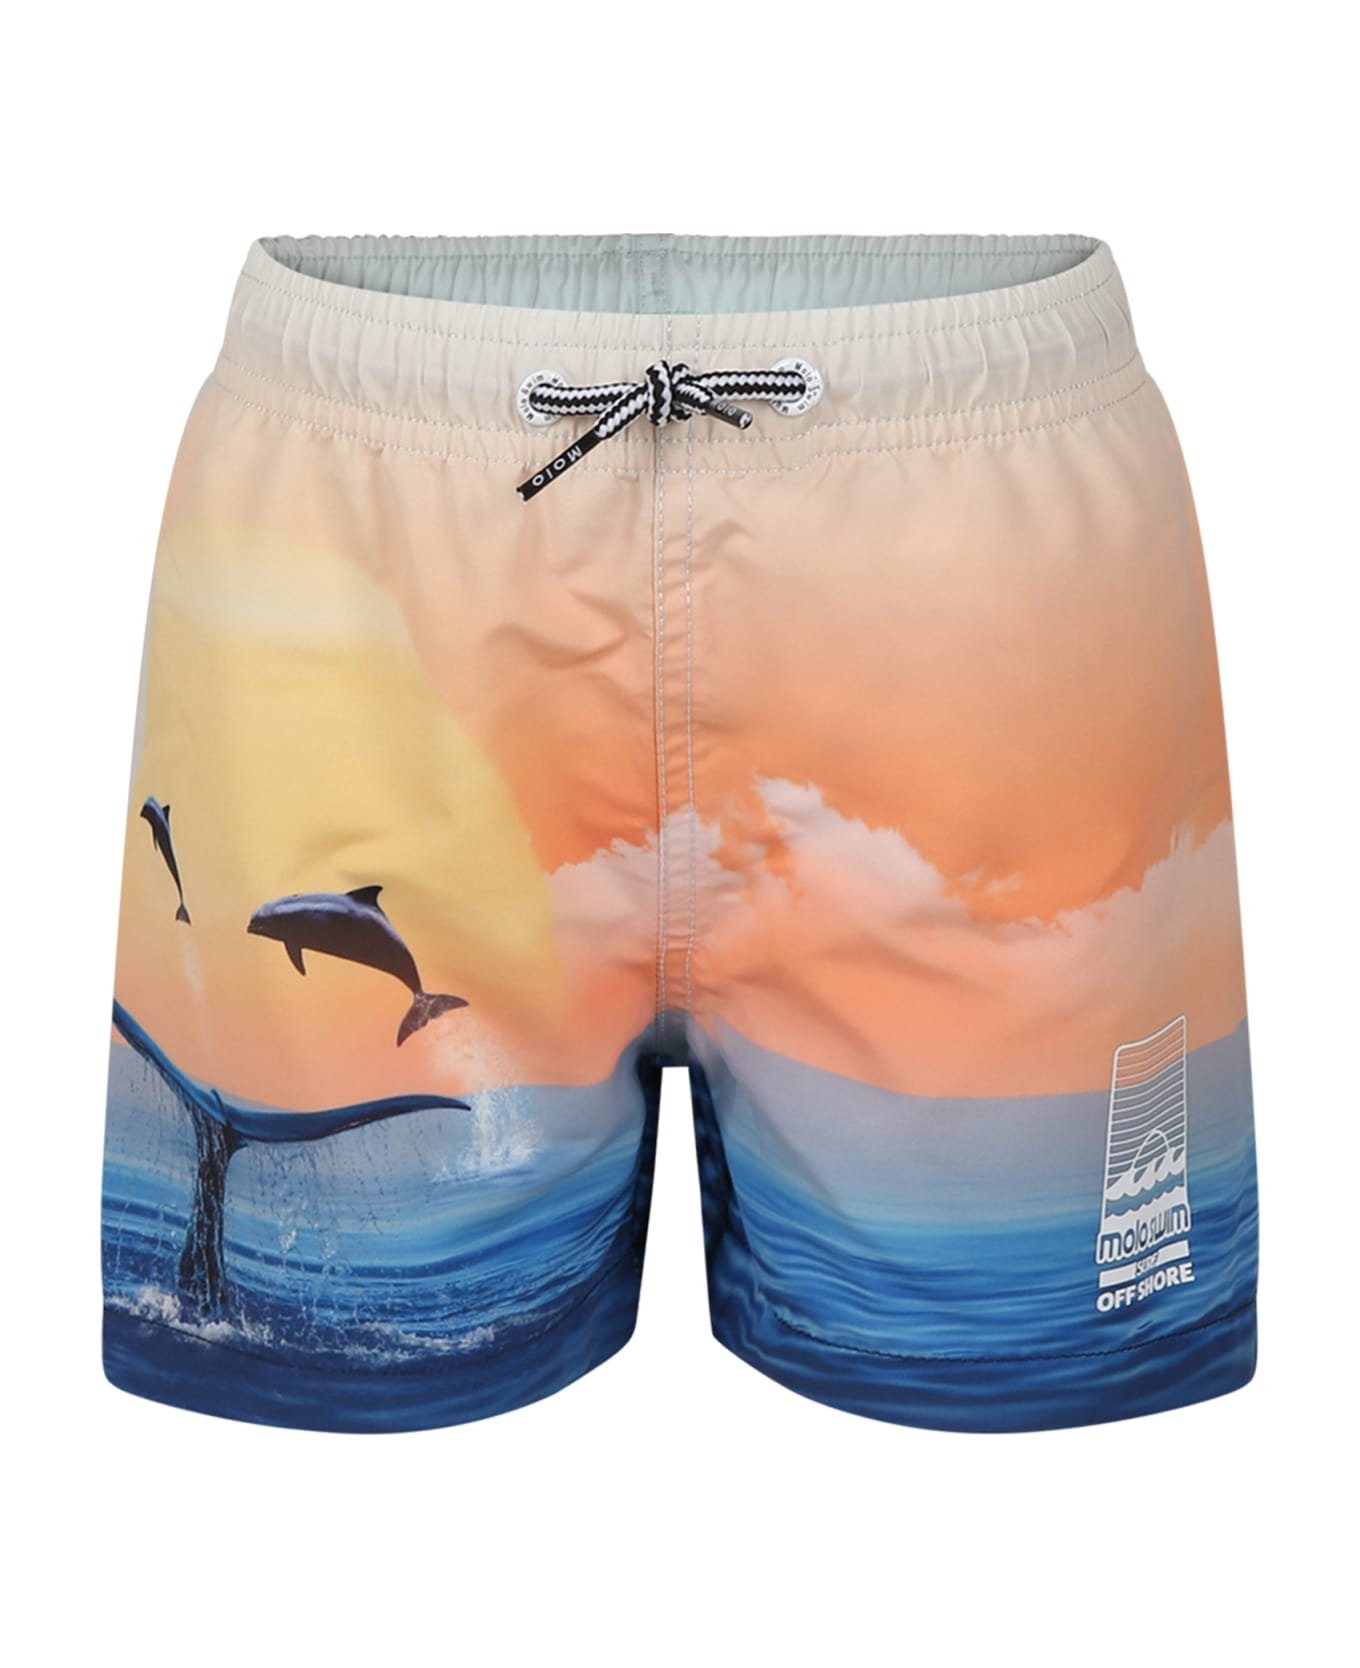 Molo Orange Swimsuit For Boy With Dolphins - Multicolor